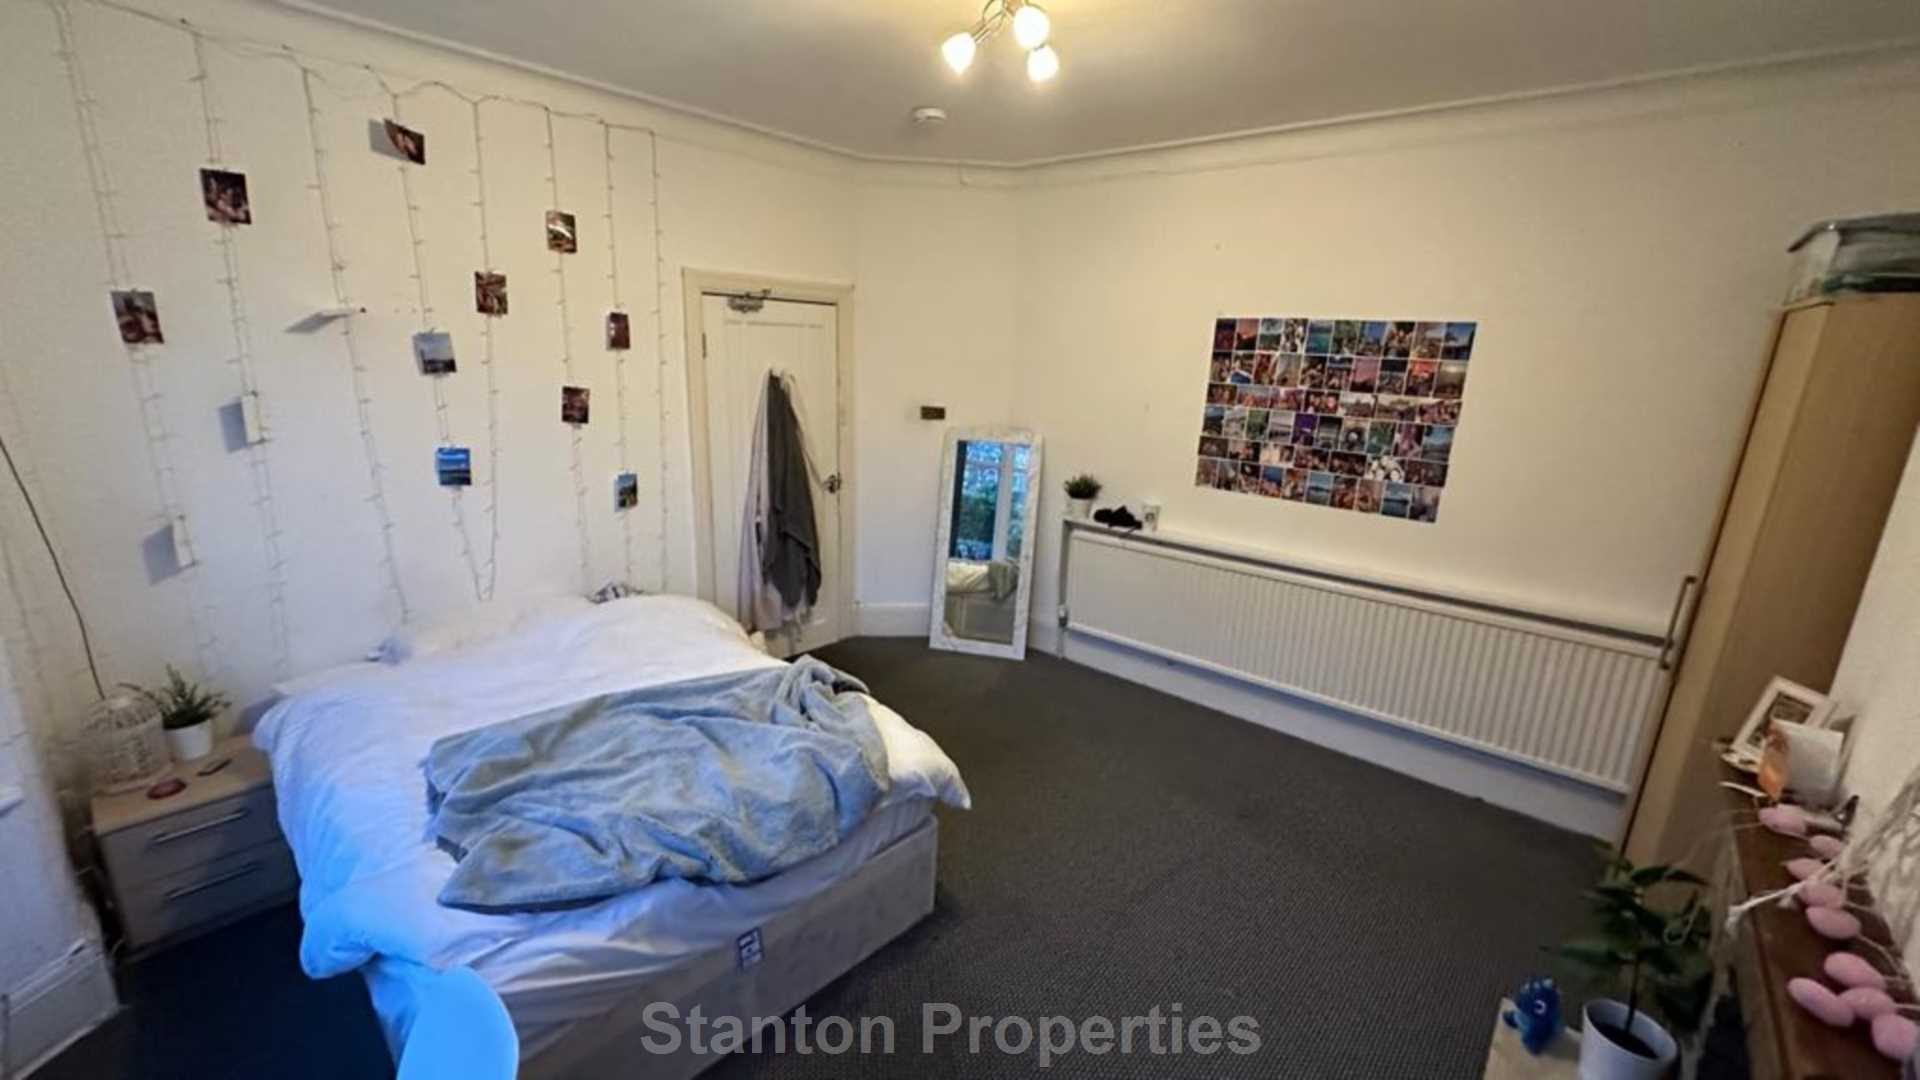 £115 pppw Wellington Road, Fallowfield, Manchester, Image 8